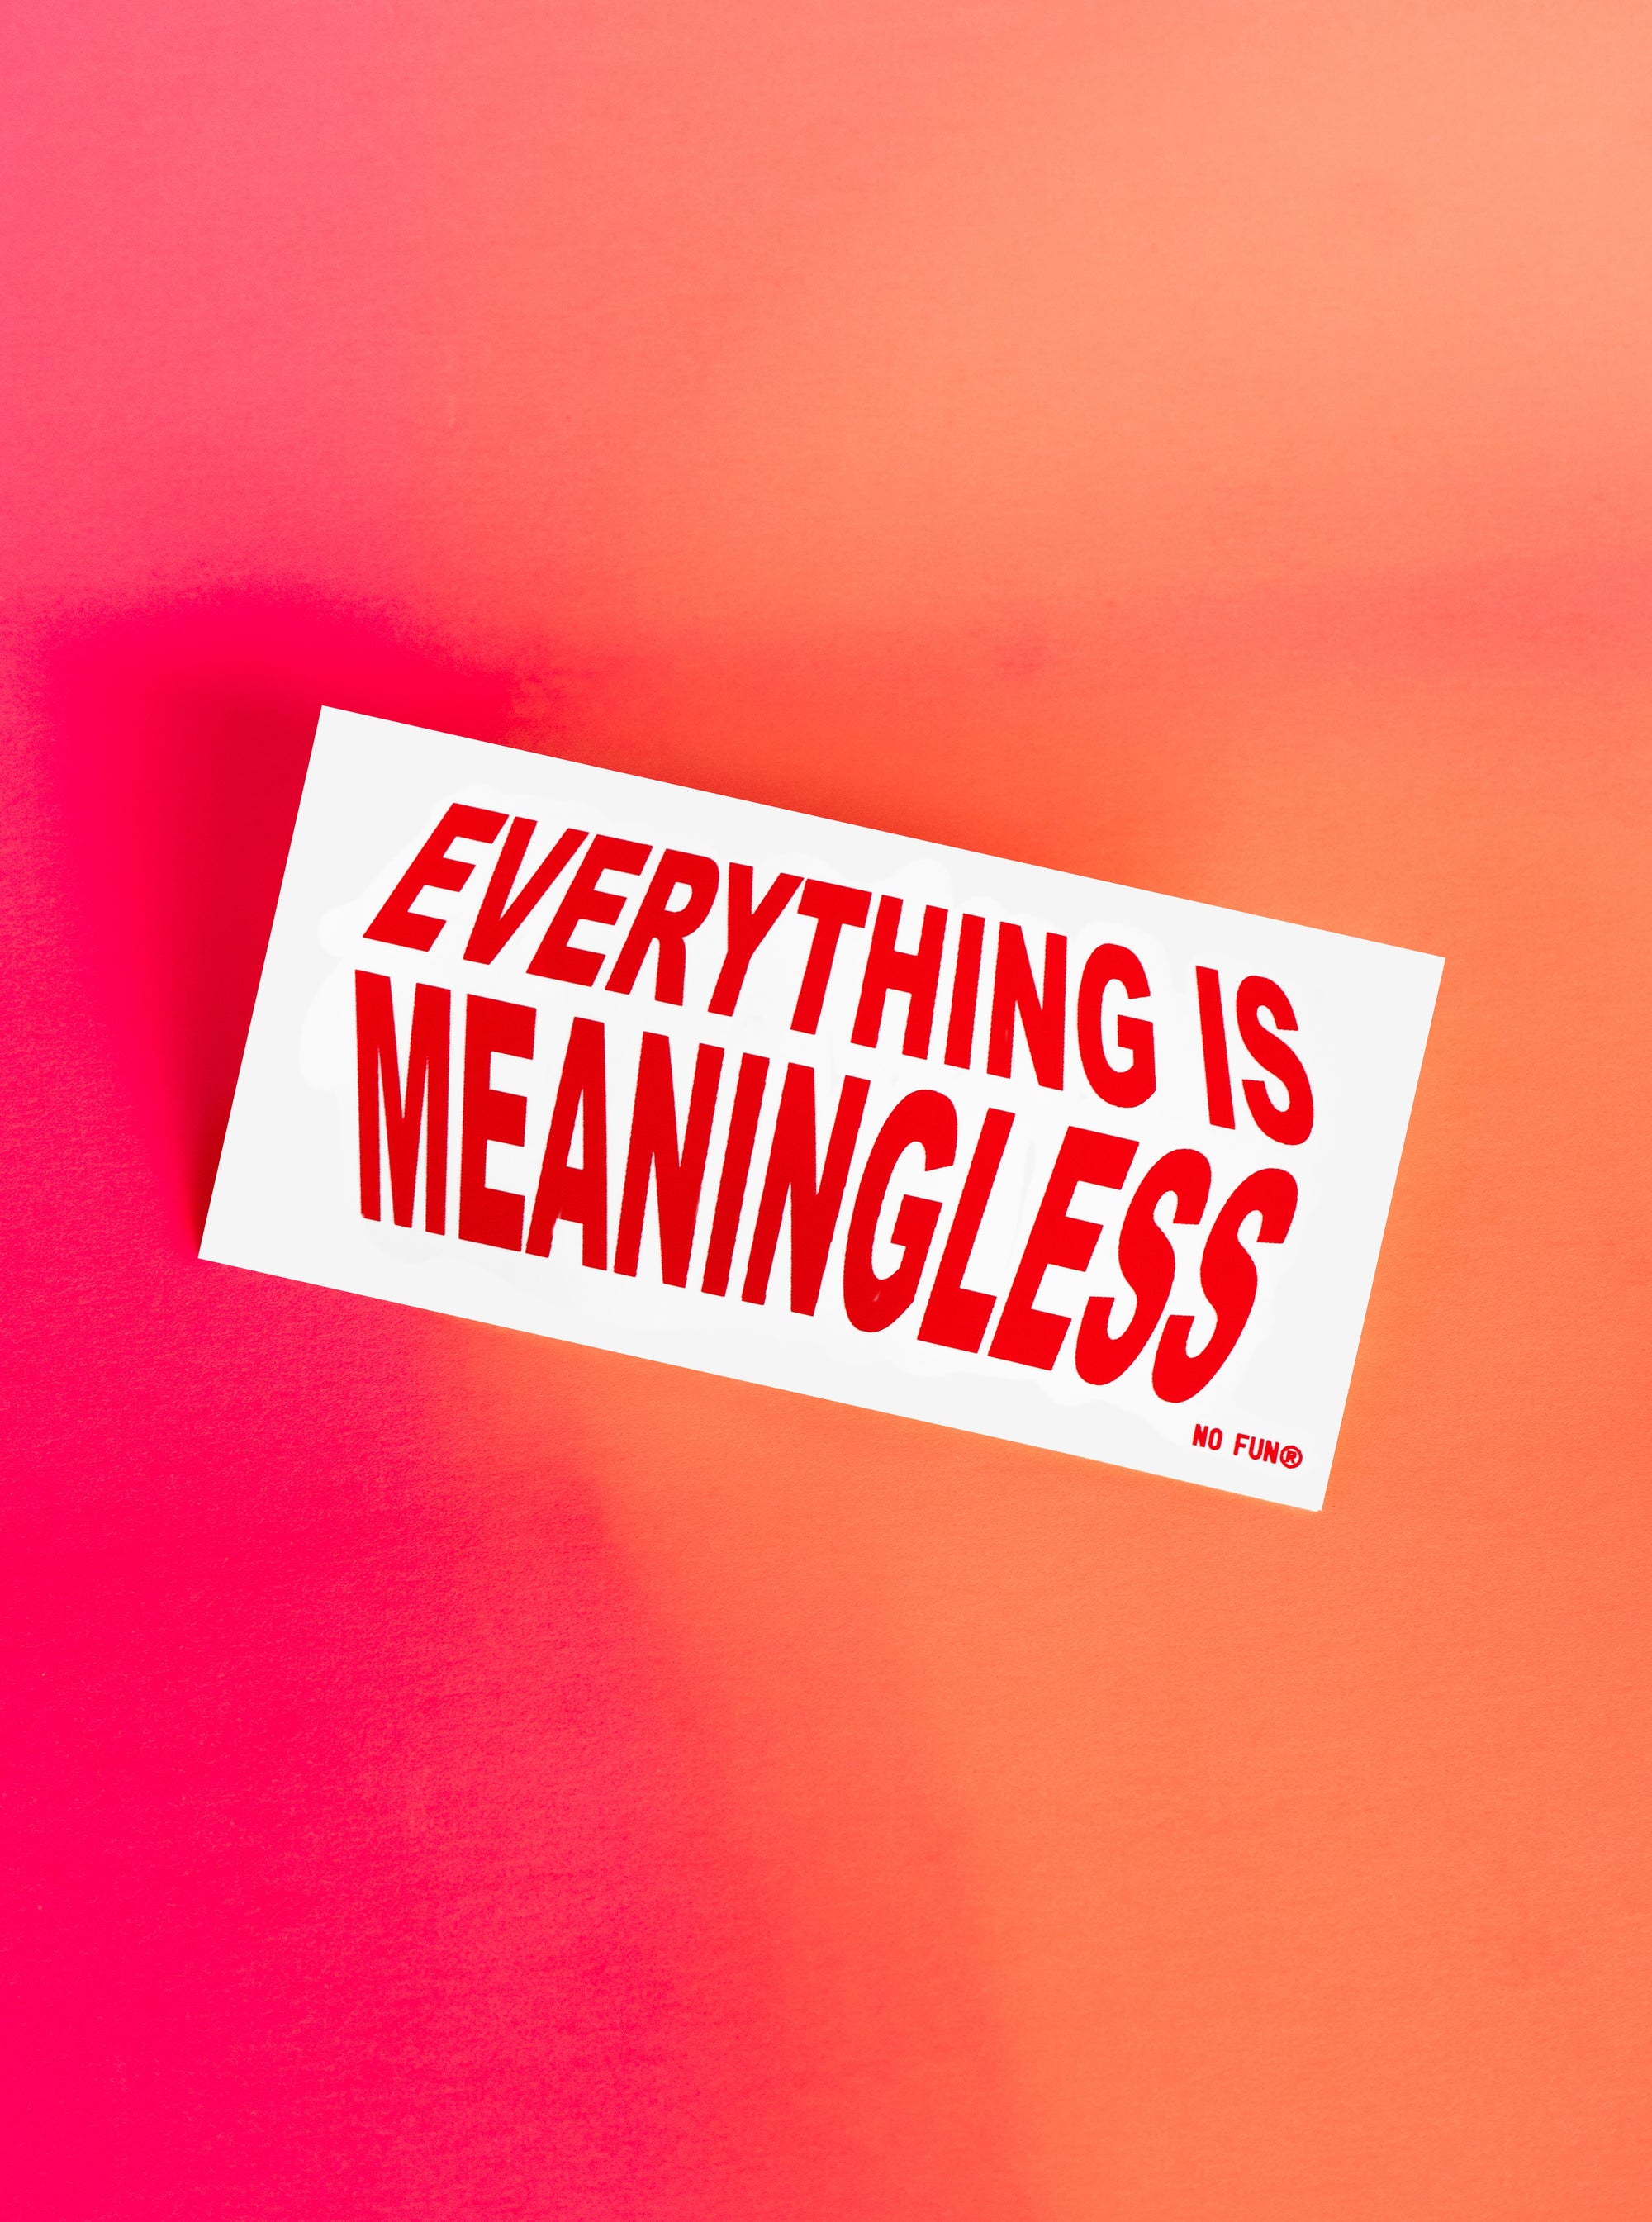 "Everything is Meaningless" Bumper Sticker